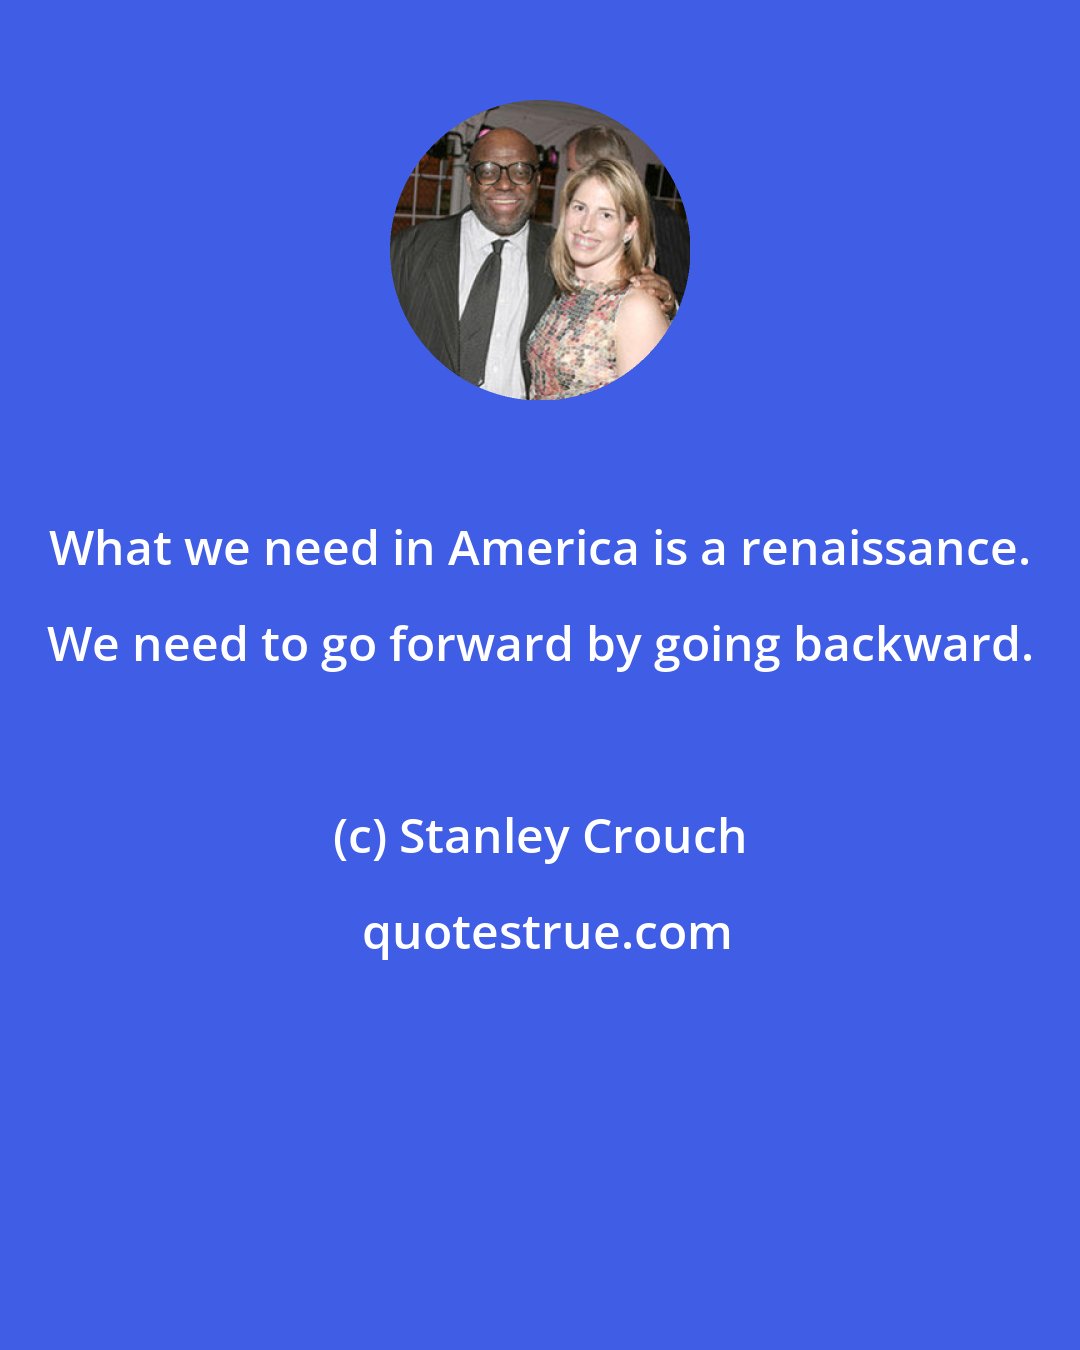 Stanley Crouch: What we need in America is a renaissance. We need to go forward by going backward.